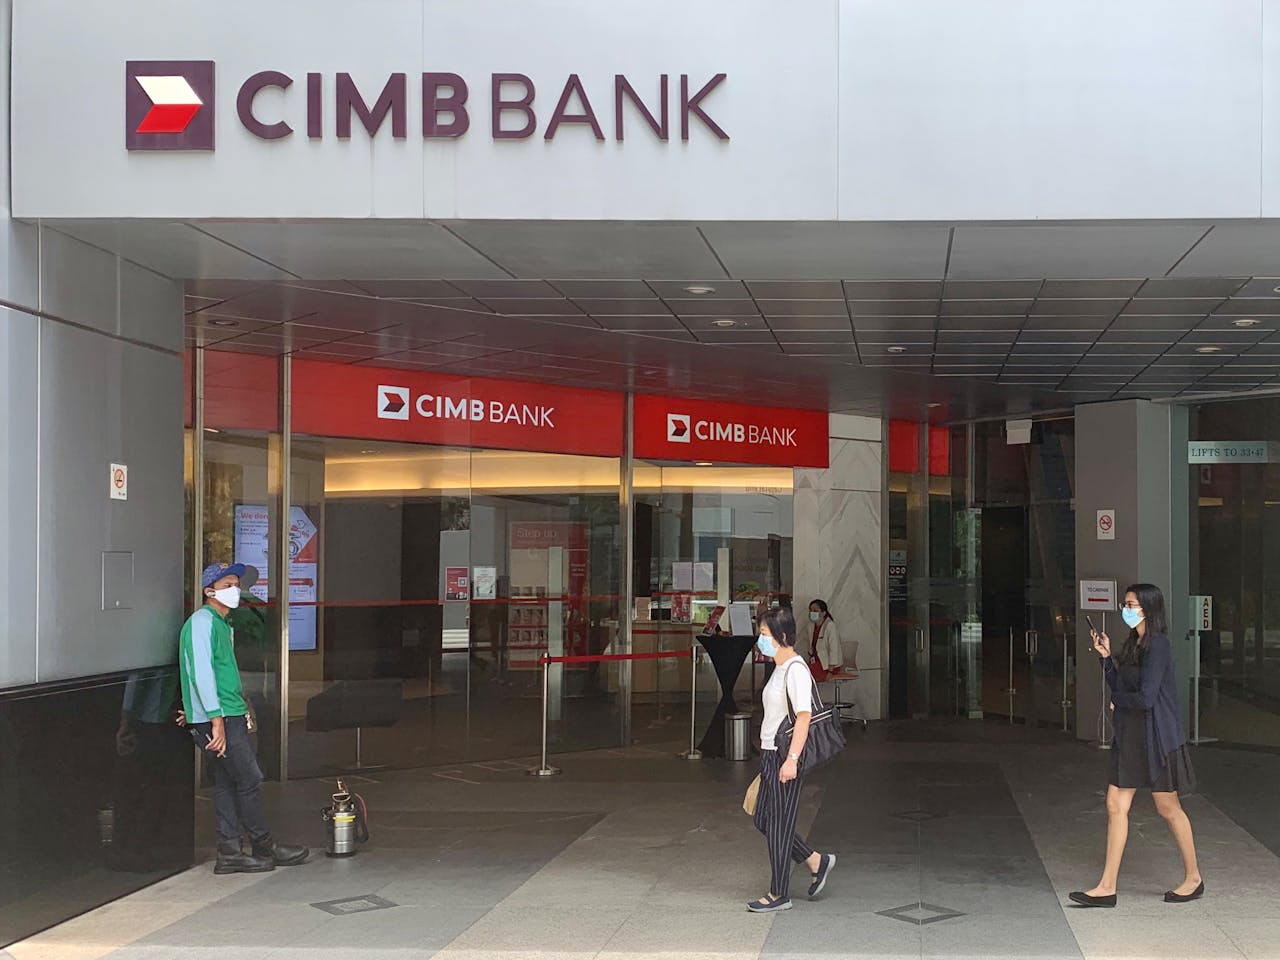 Malaysia S Cimb Bank Unveils 2040 Coal Exit Plan News Eco Business Asia Pacific